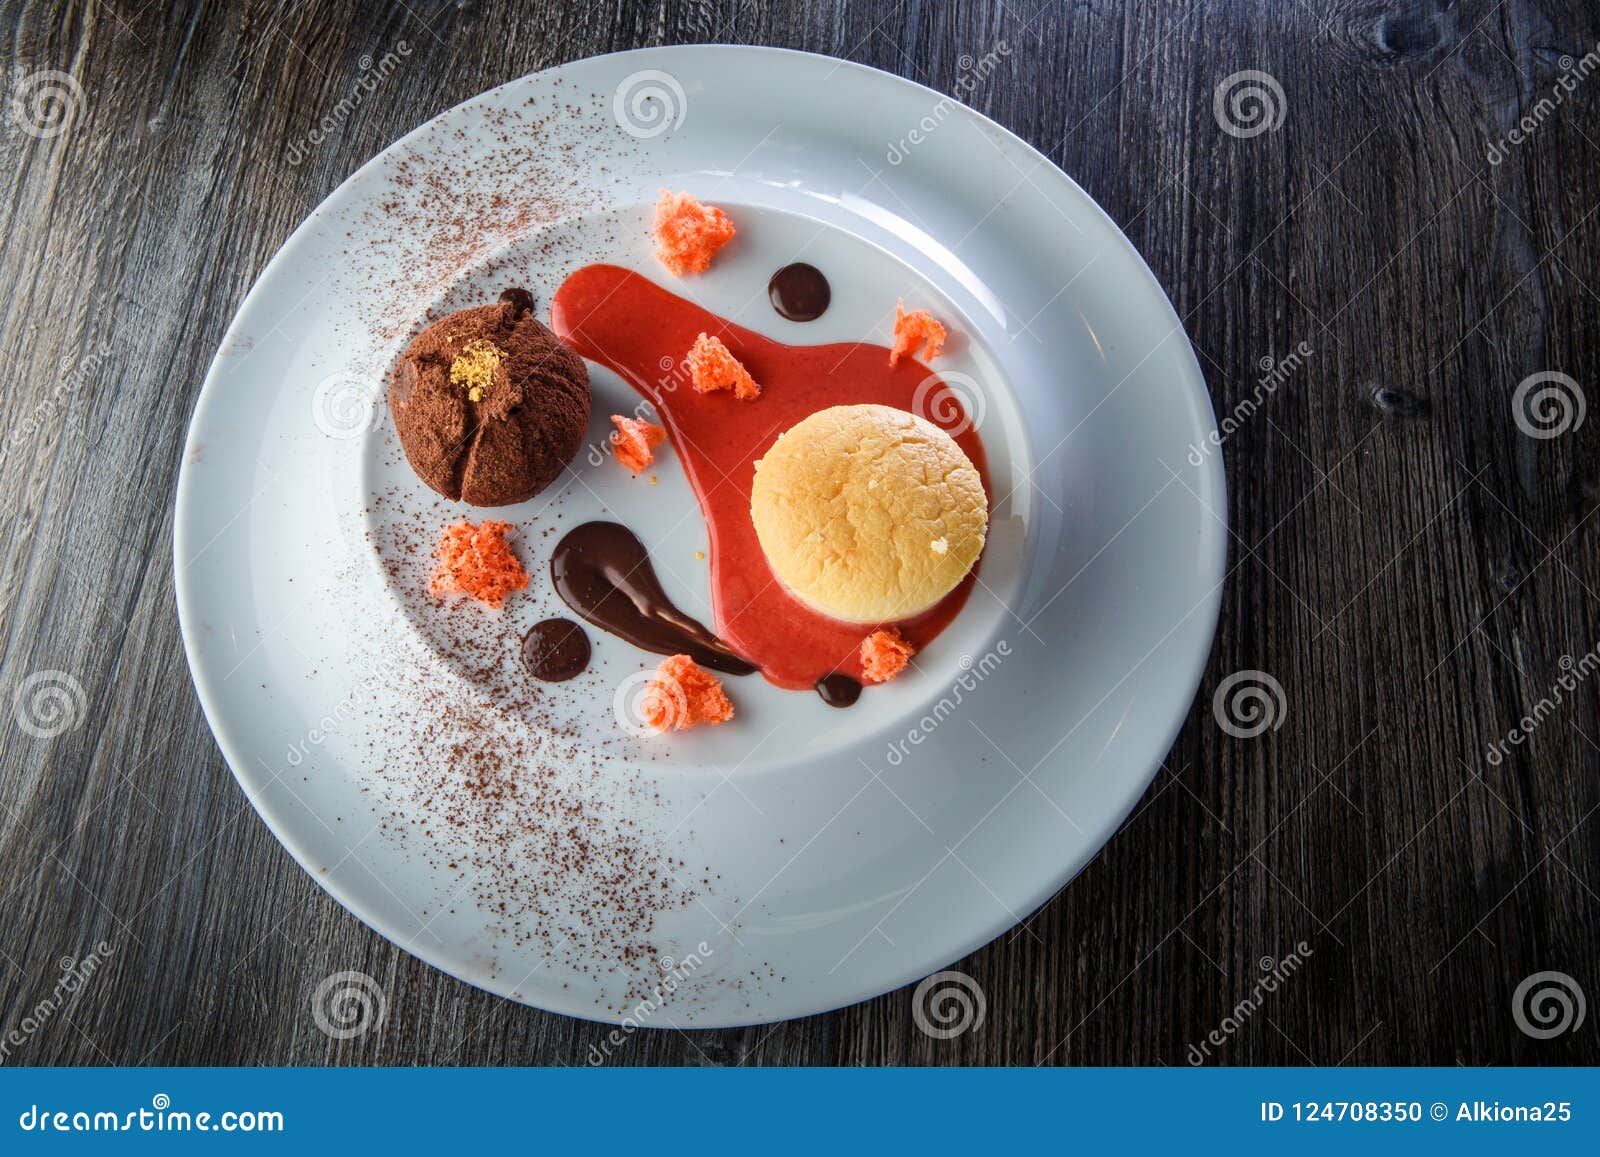 Top View Of Delicious Truffle Dessert Of With Sauce